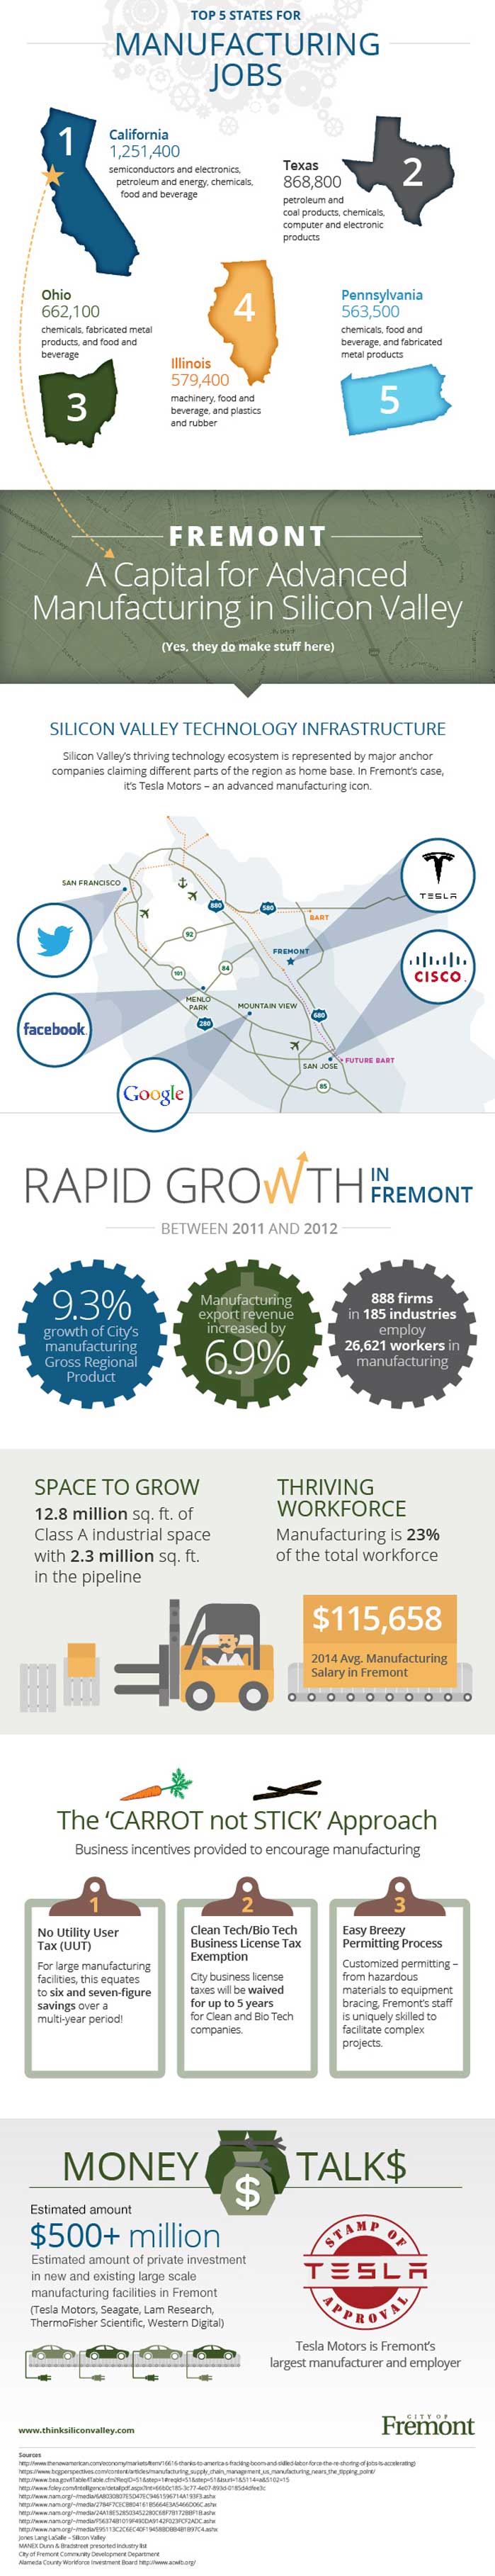 Fremont, CA Commercial Real Estate Services. Contact The Ivy Group to learn about the Rise of Fremont's Innovation District and learn how we can help you solve all your real estate challenges.